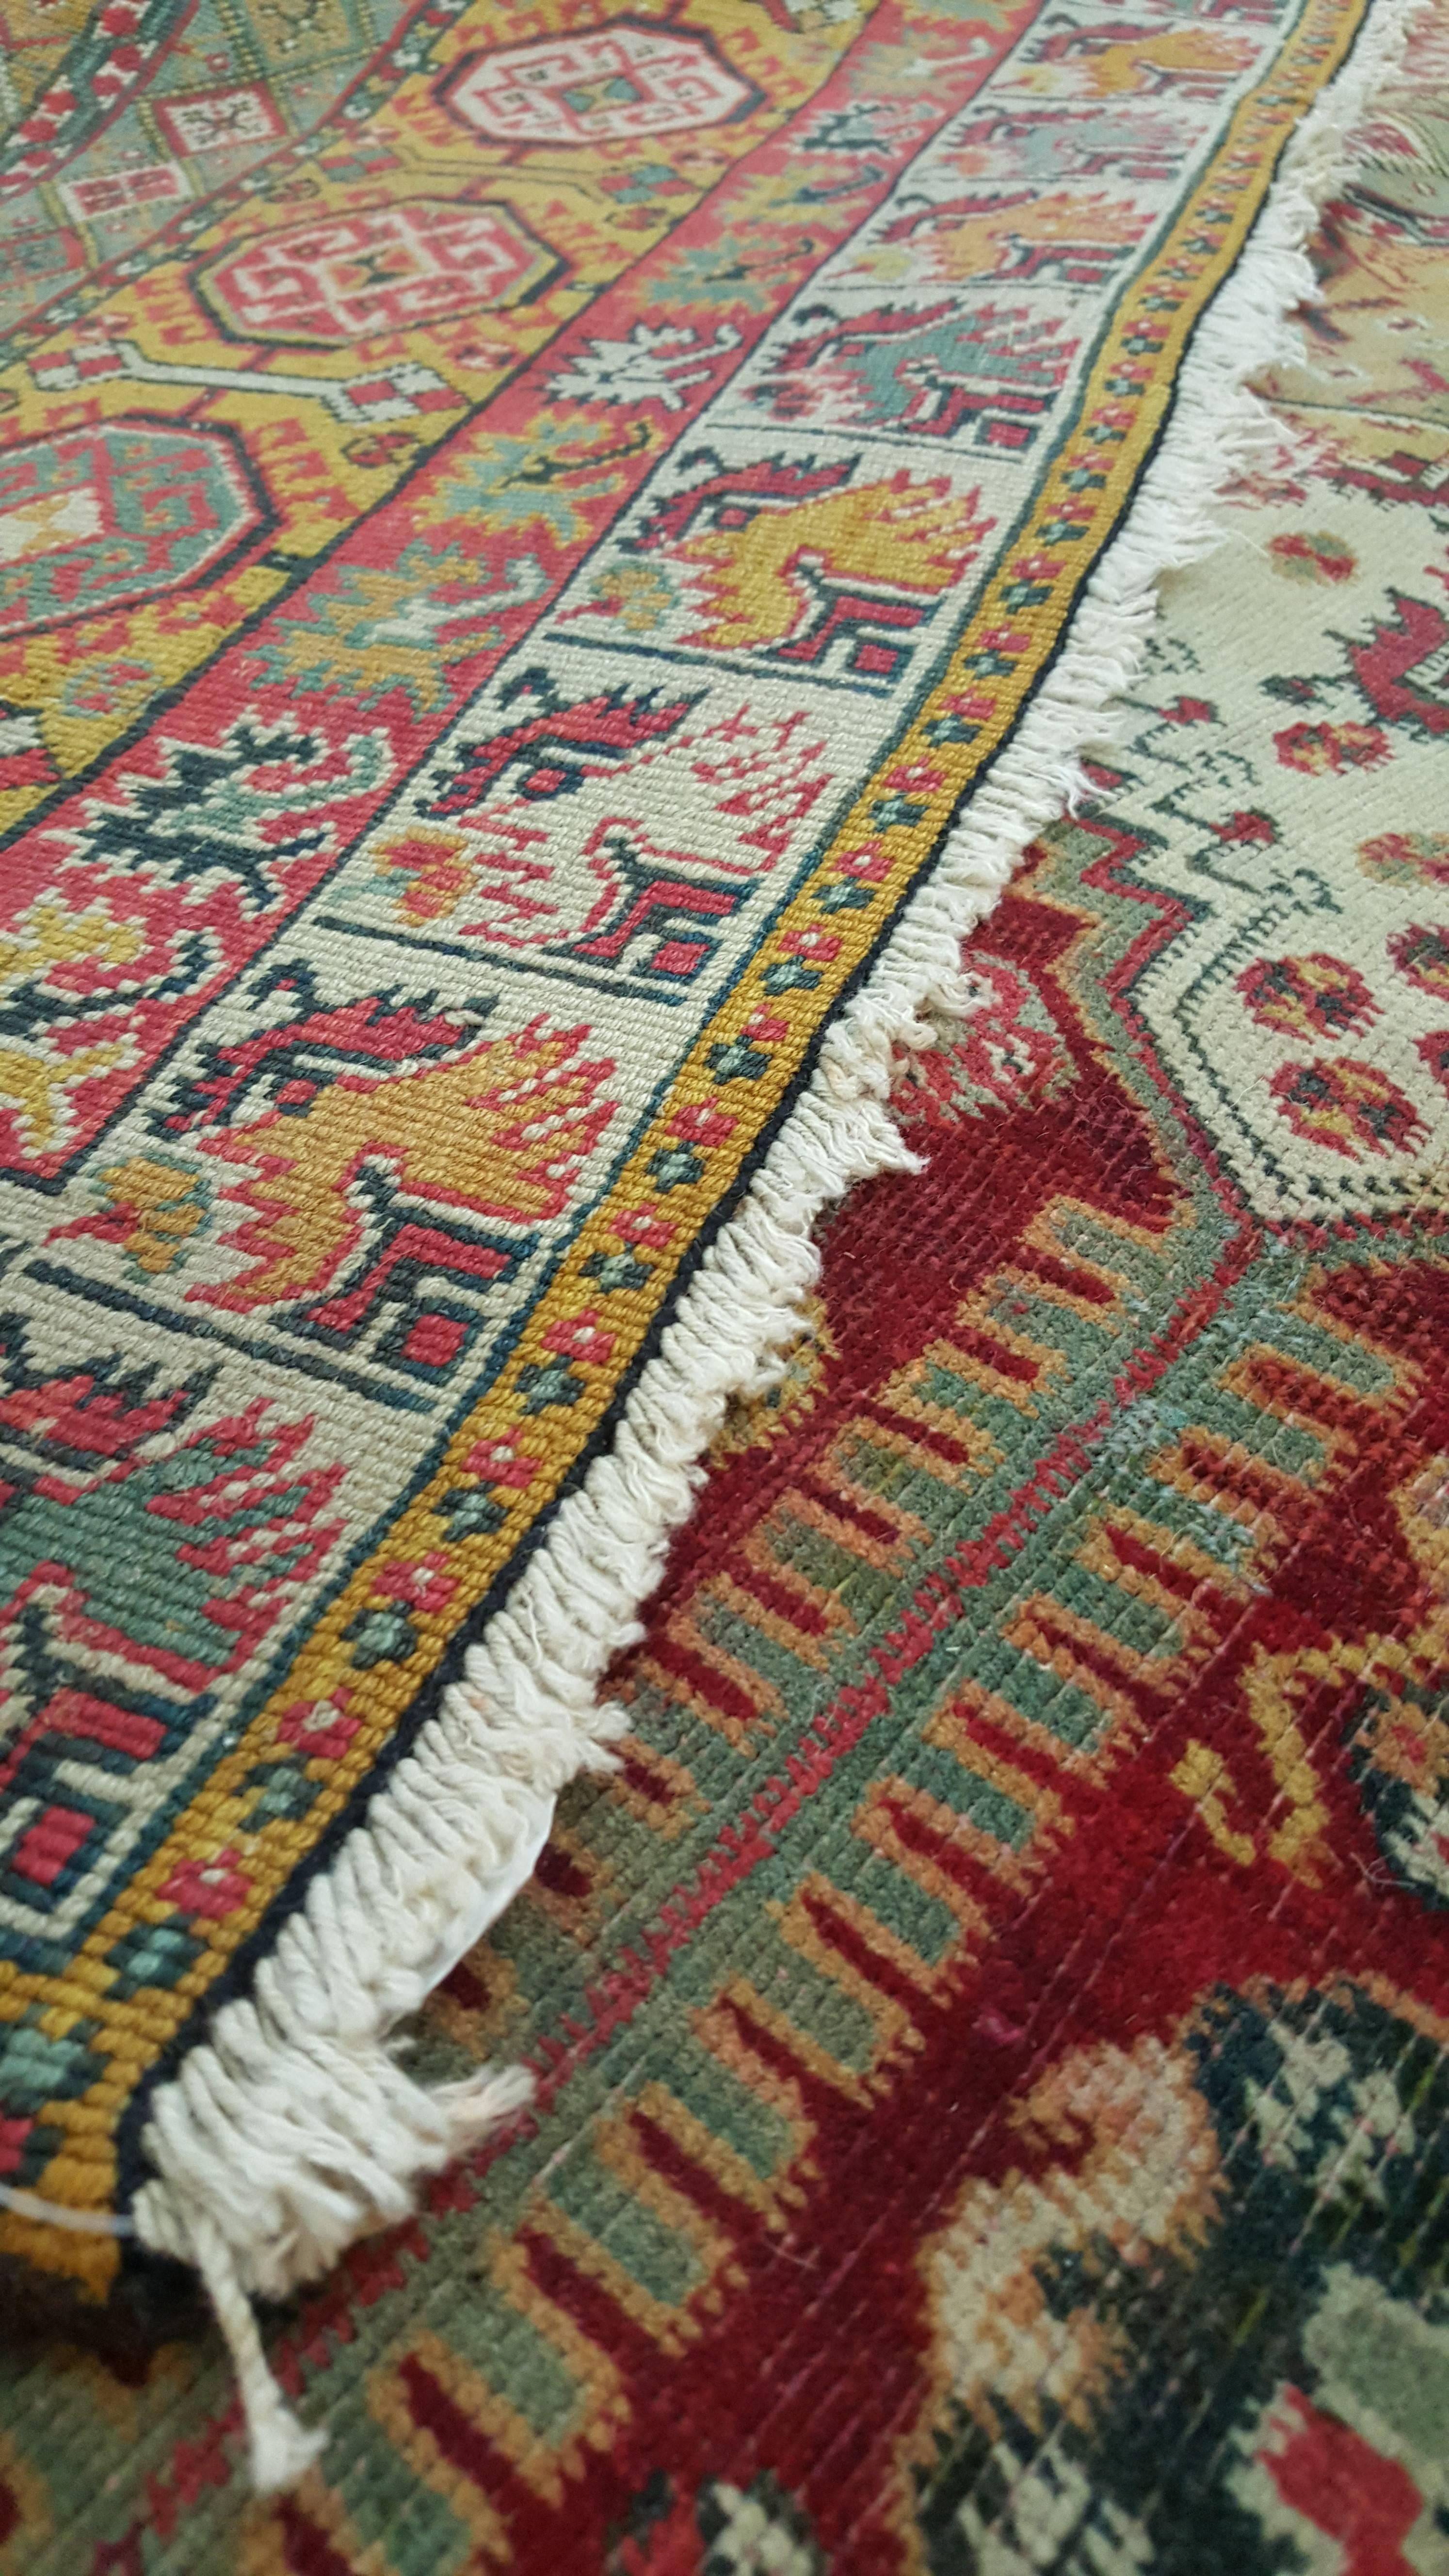 Wool Antique Indian Agra Carpet, Indian Rugs, Oriental Rugs, Red, Gold, 5'10